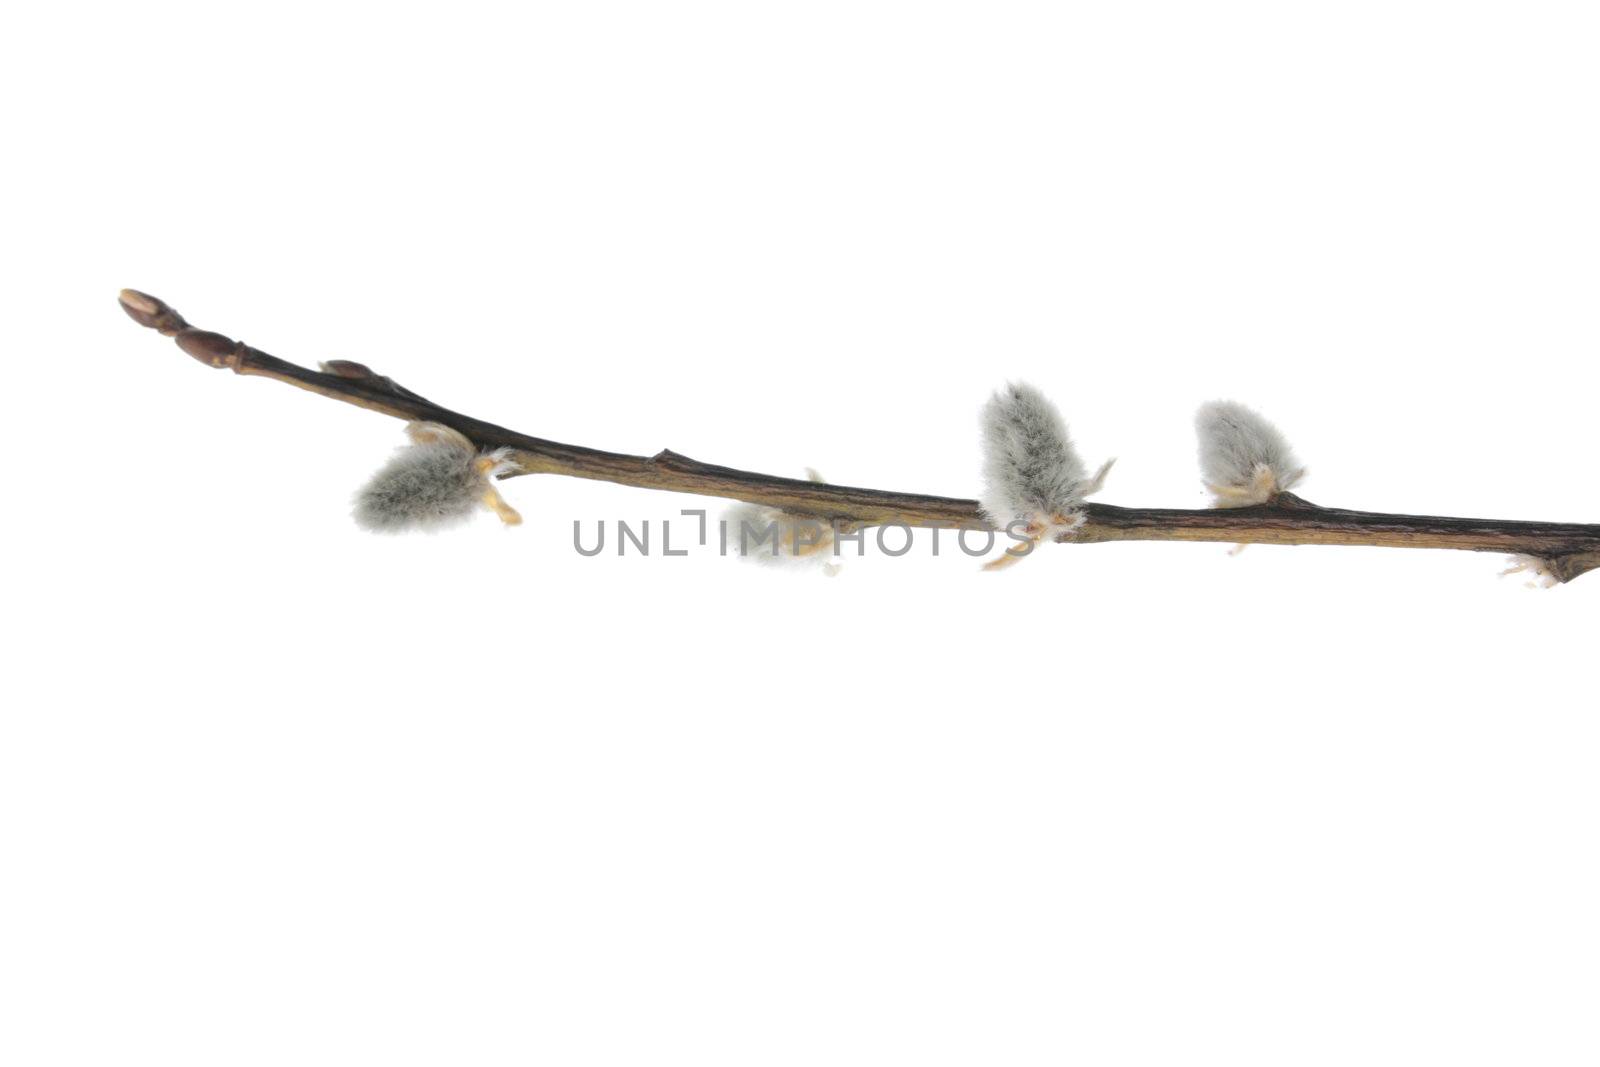 Twigs of willow with catkins on a white background by BDS